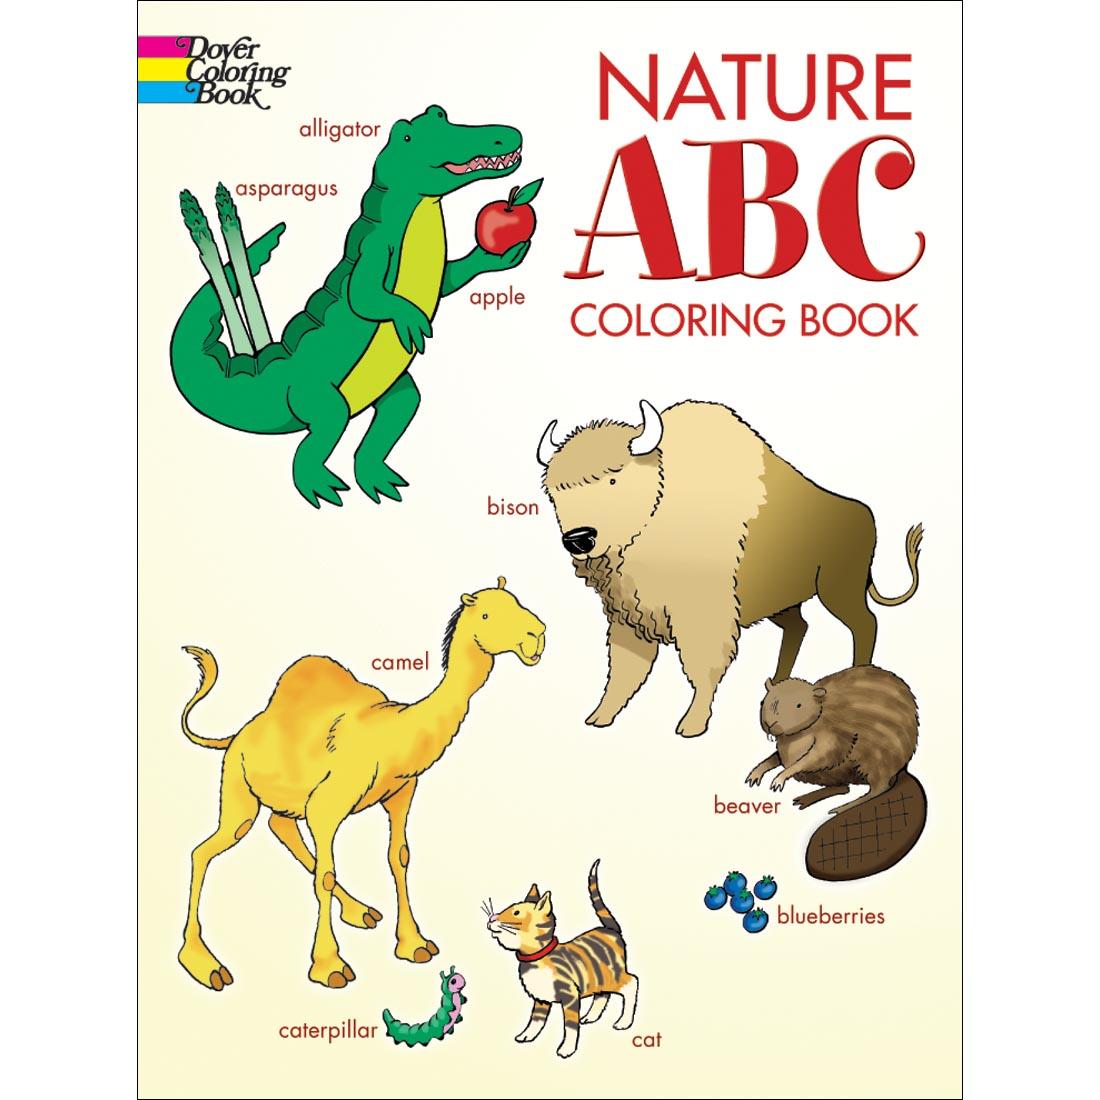 Nature ABC Coloring Book by Dover